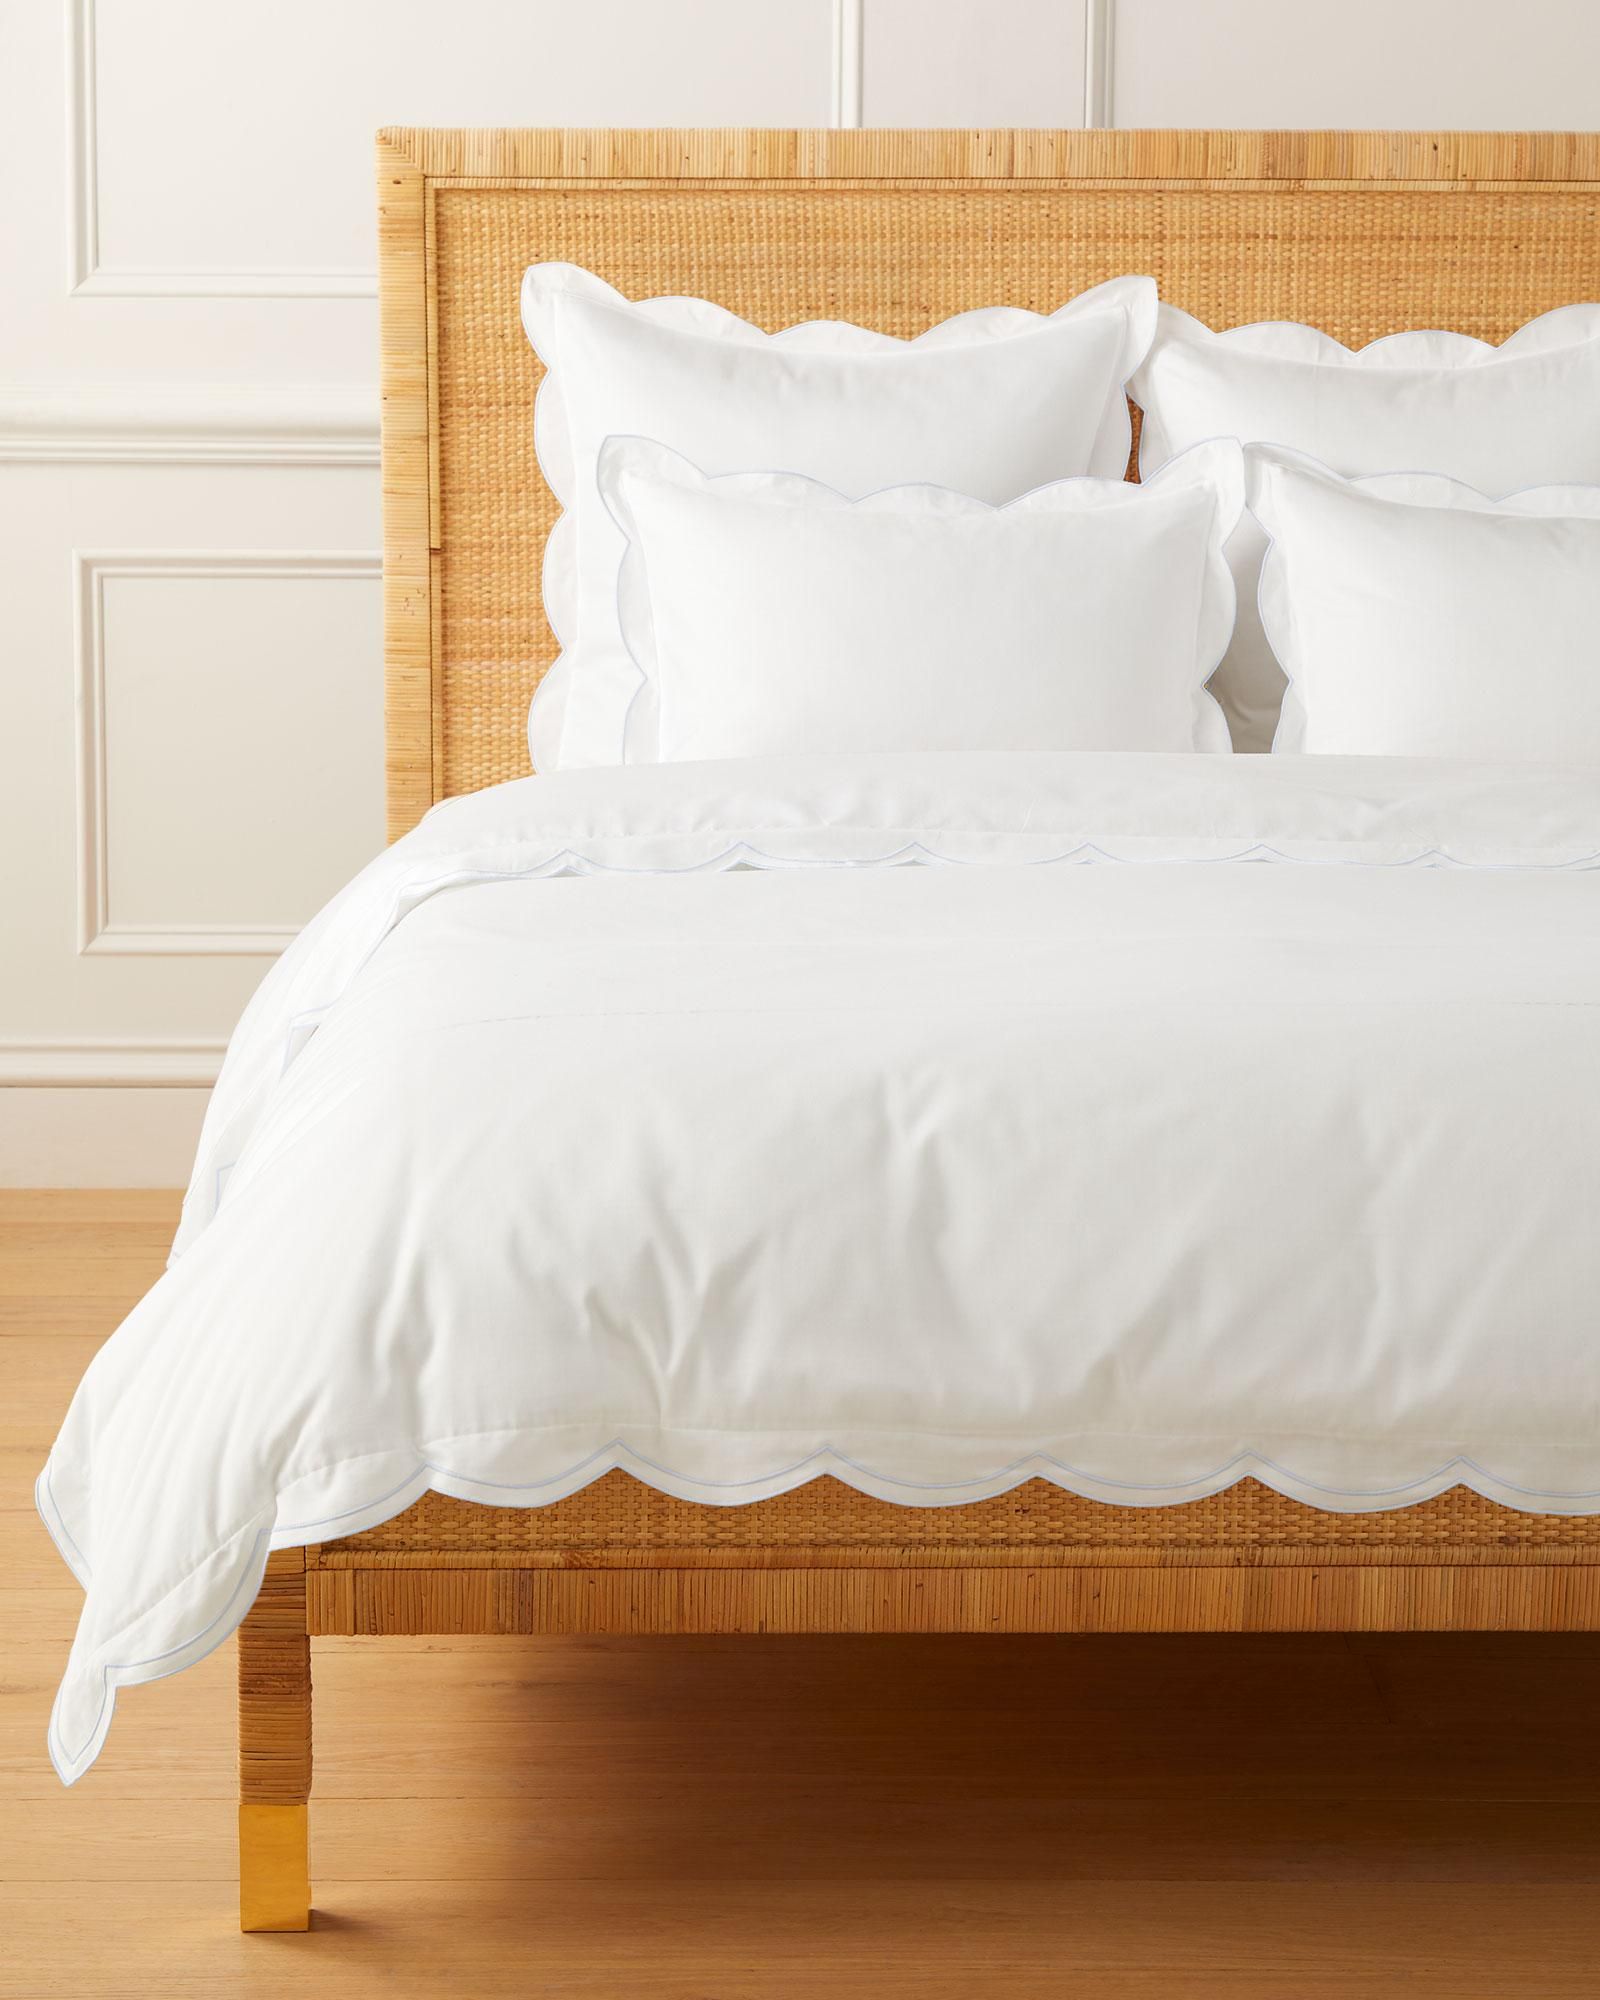 Scallop Sateen Duvet Cover | Serena and Lily